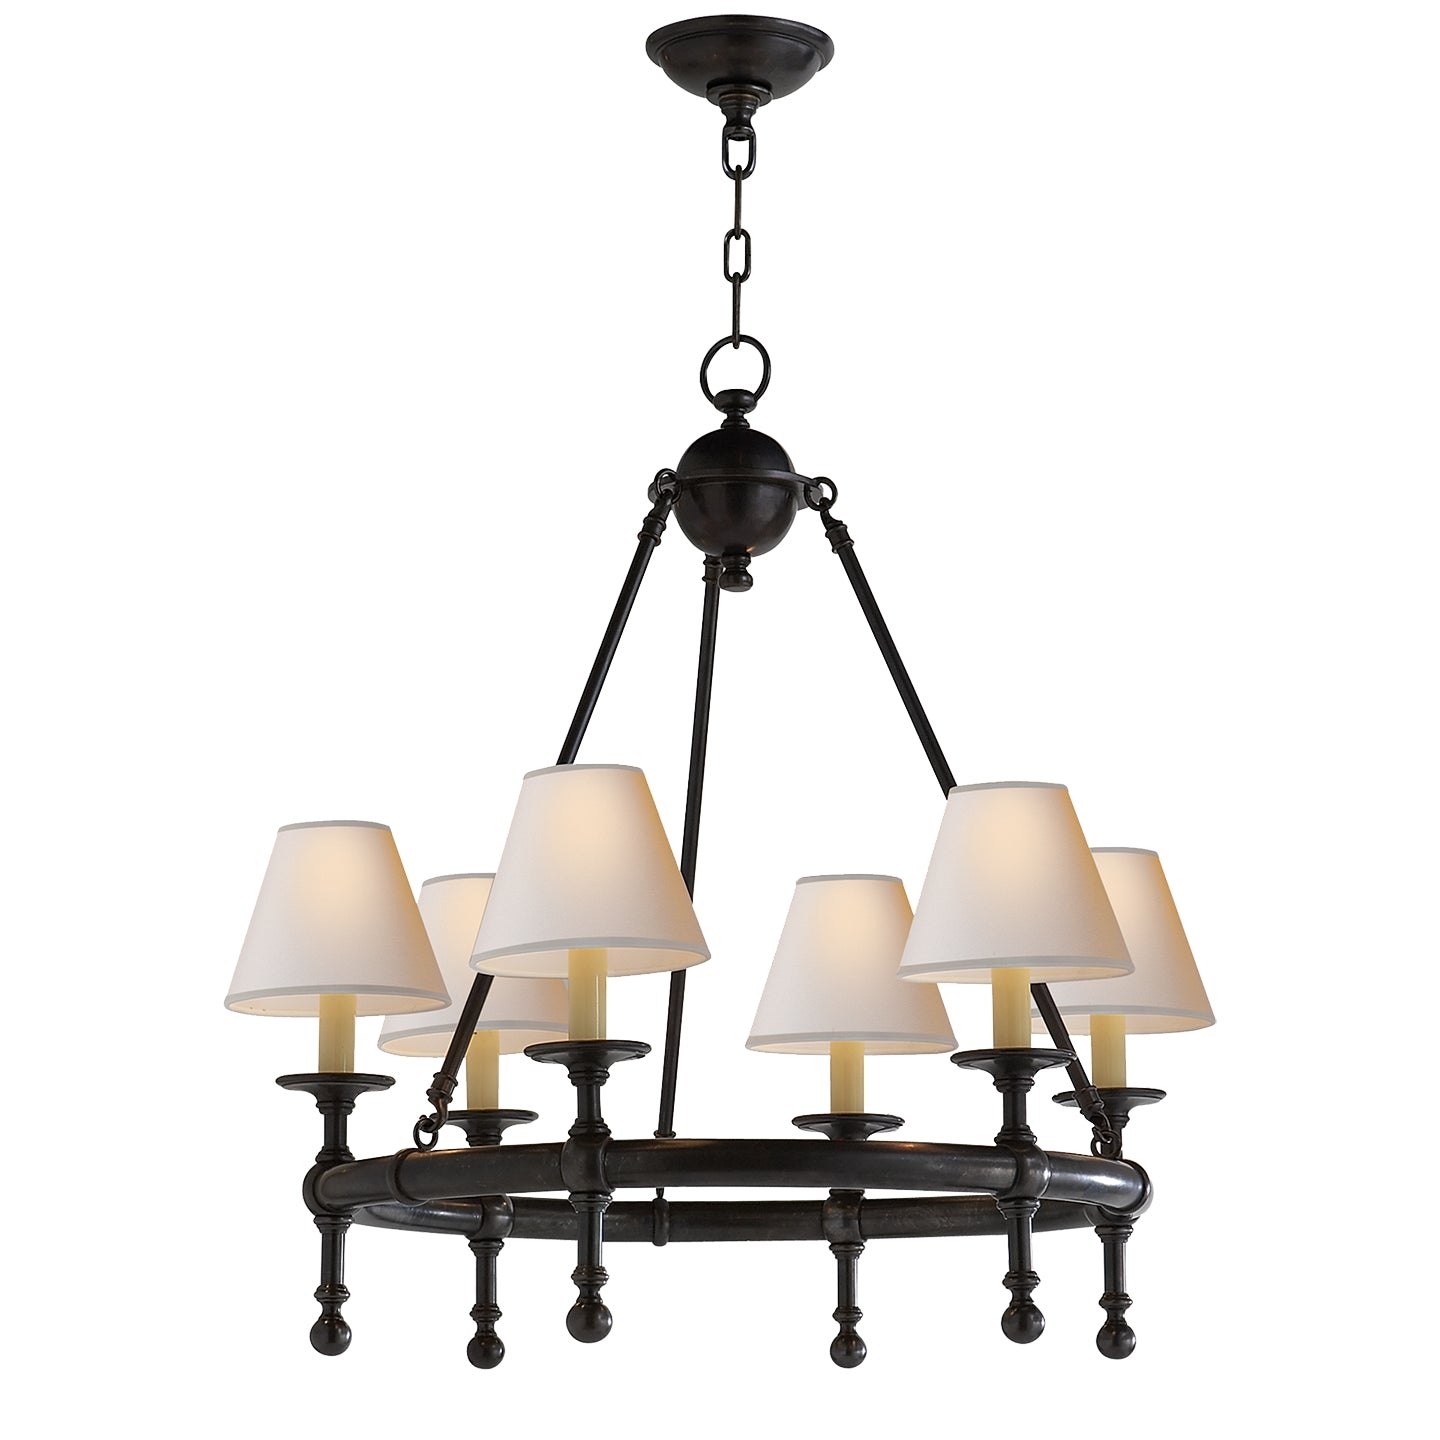 Load image into Gallery viewer, Visual Comfort Signature - SL 5814BZ-NP - Six Light Chandelier - Classic - Bronze
